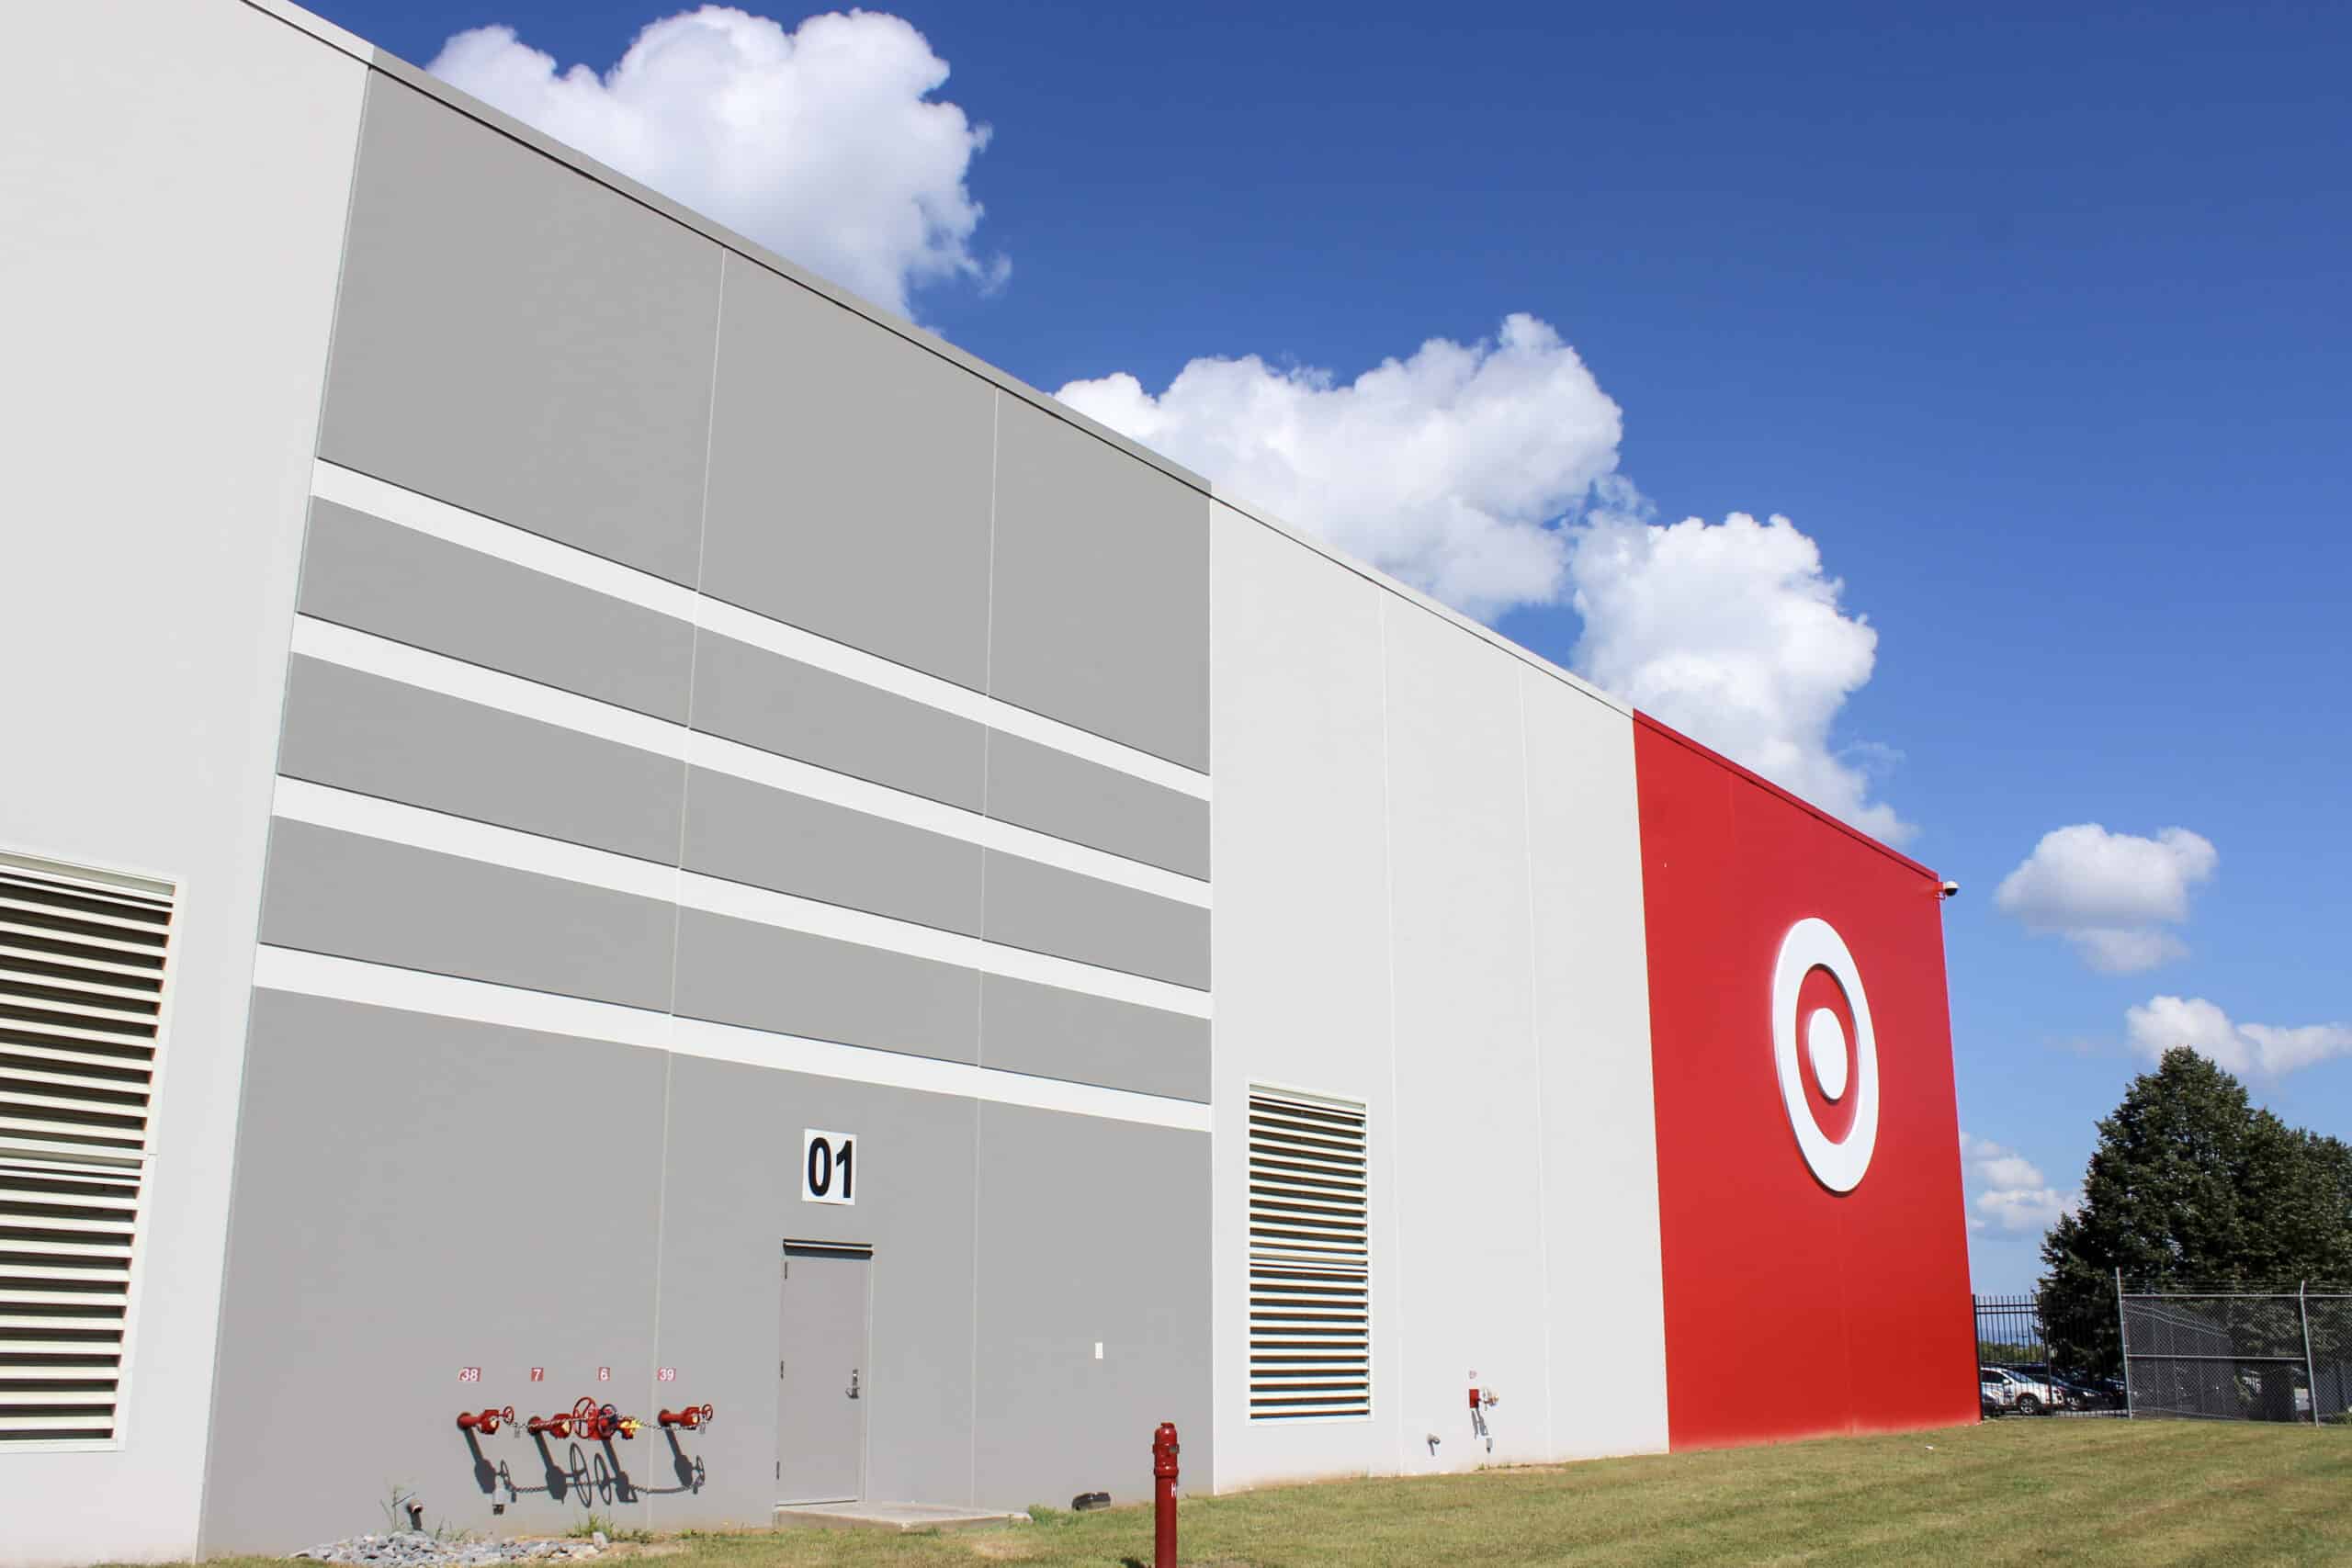 Target distribution center side repainted